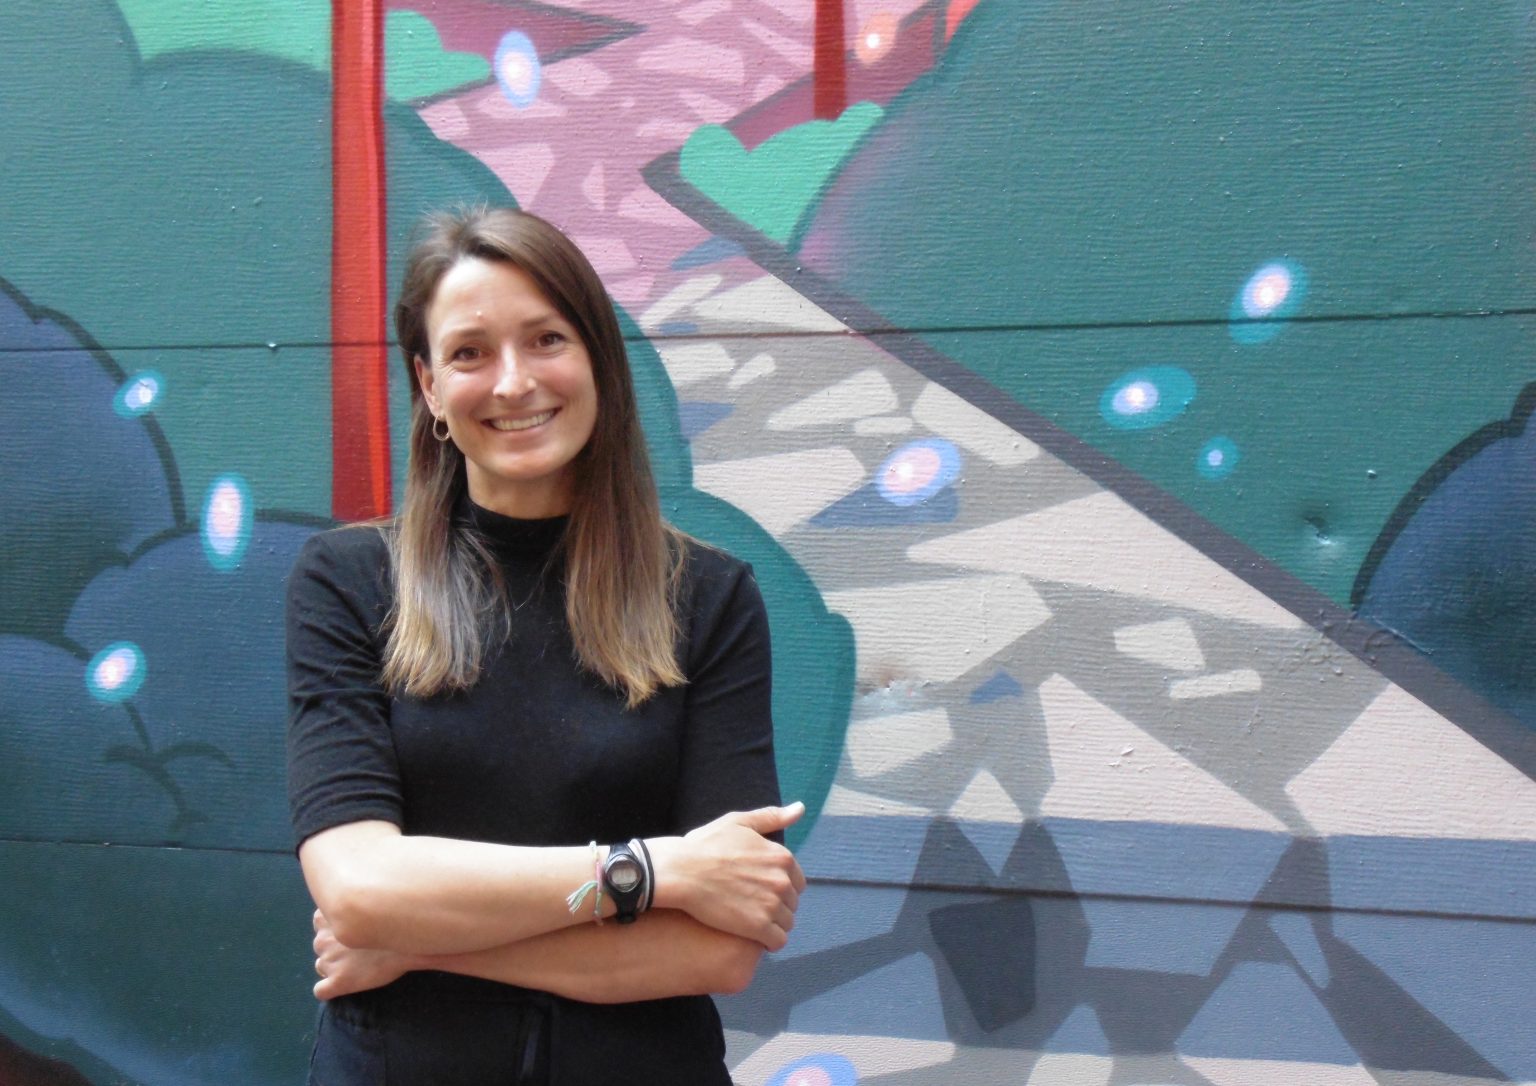 Alina McKay, former graduate research assistant at the UBC Learning Exchange, stands and smiles with arms folded in front of the mural in the alley behind the Learning Exchange.